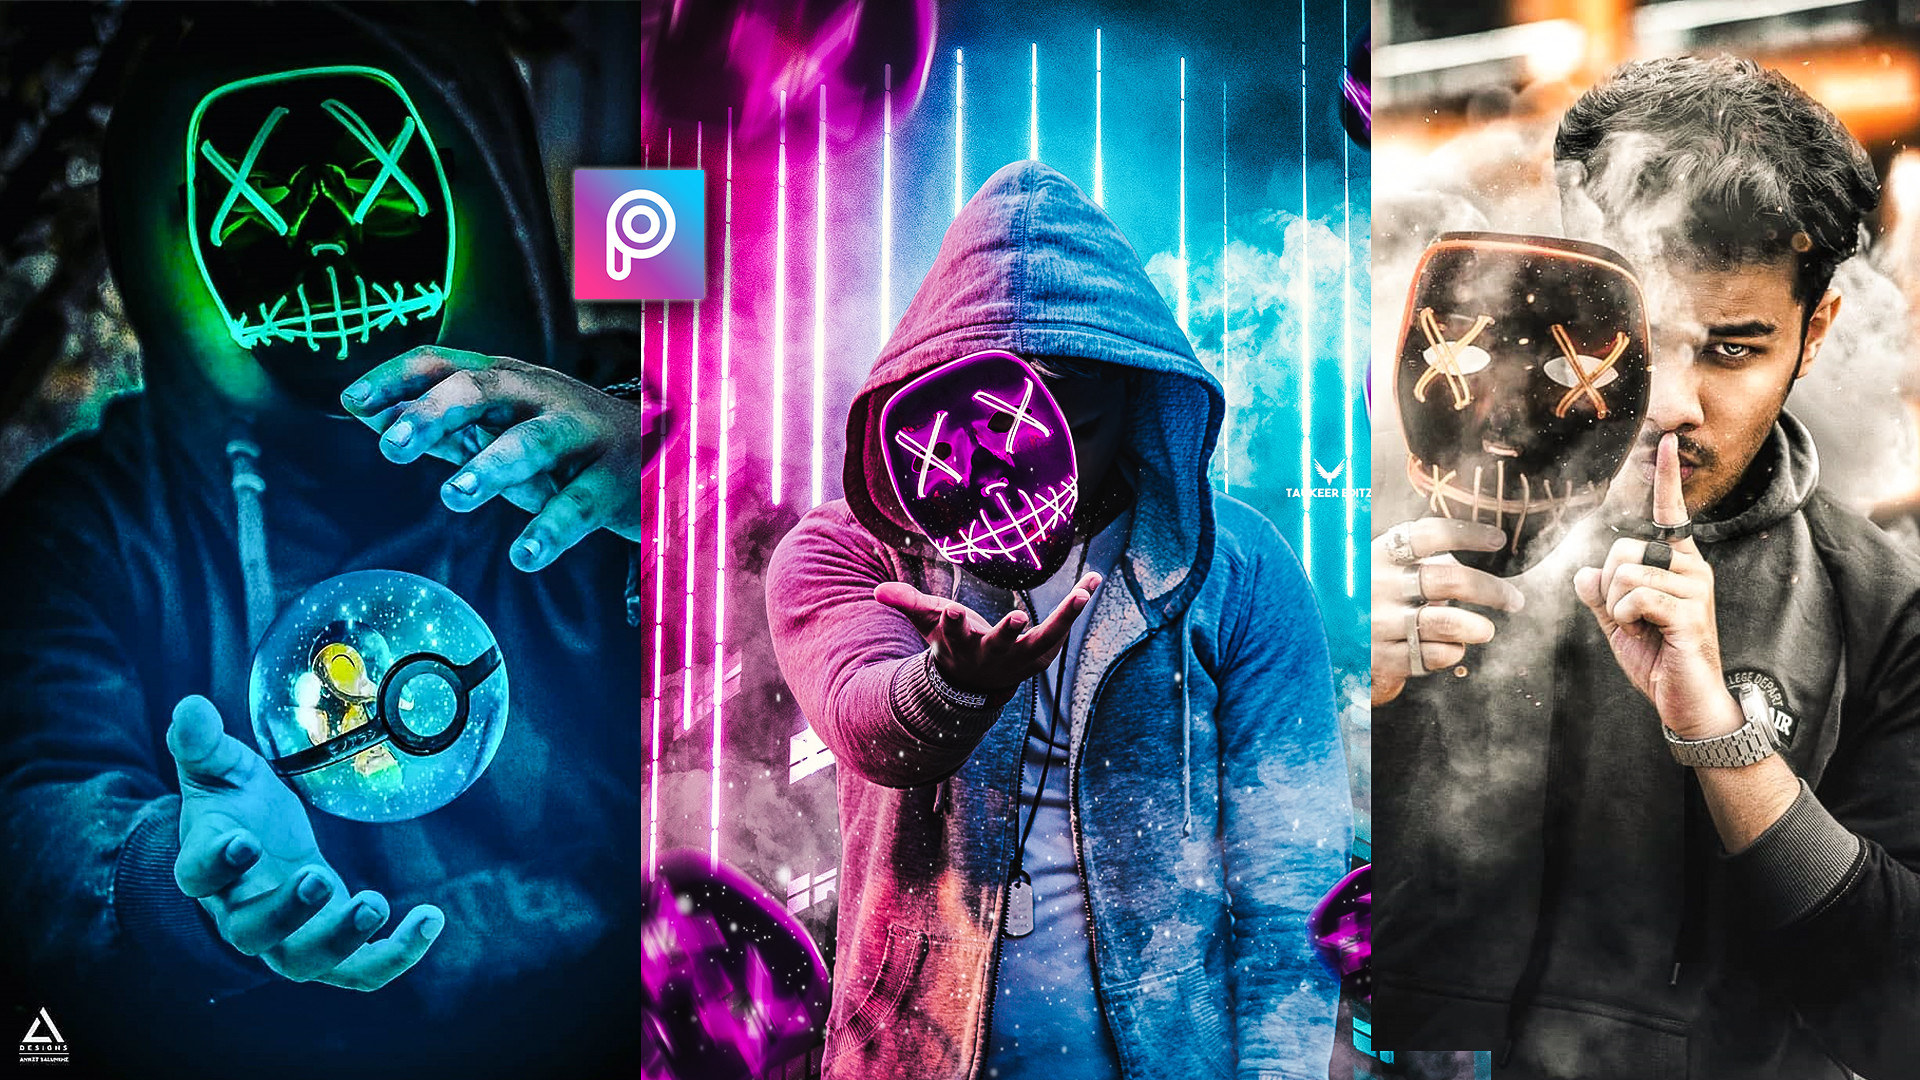 1920x1080 3D Neon Hacker Mask Photo editing background download